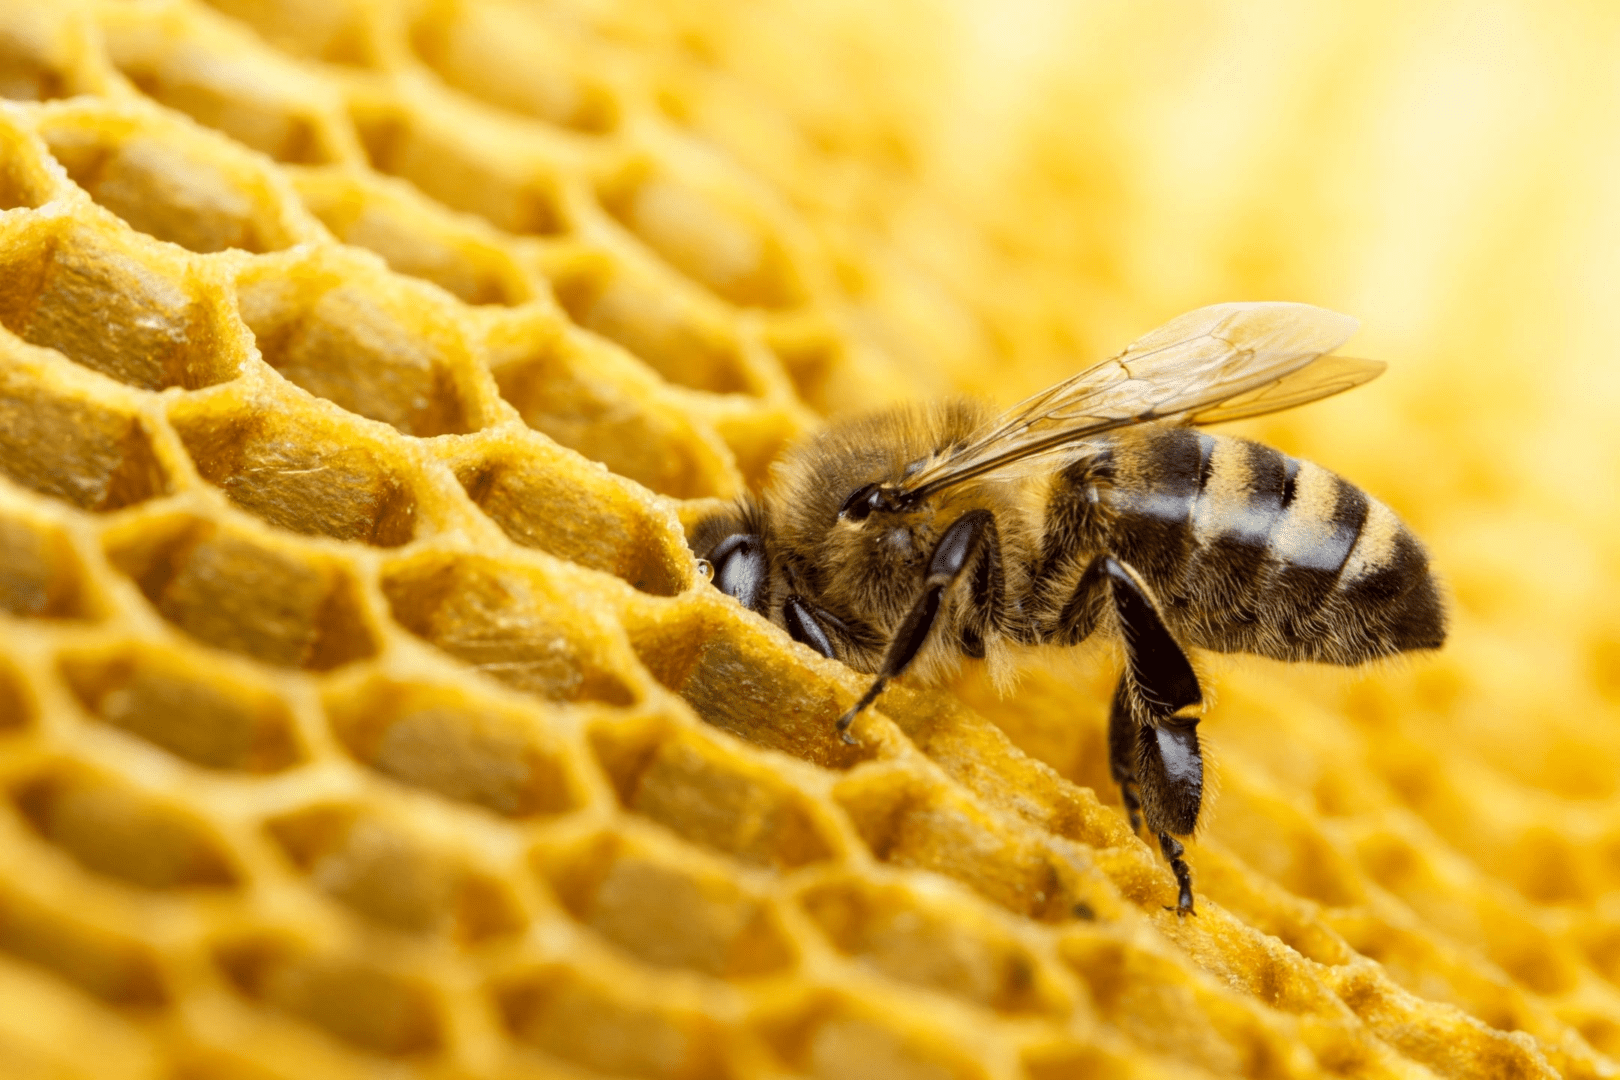 A honey bee in a hive